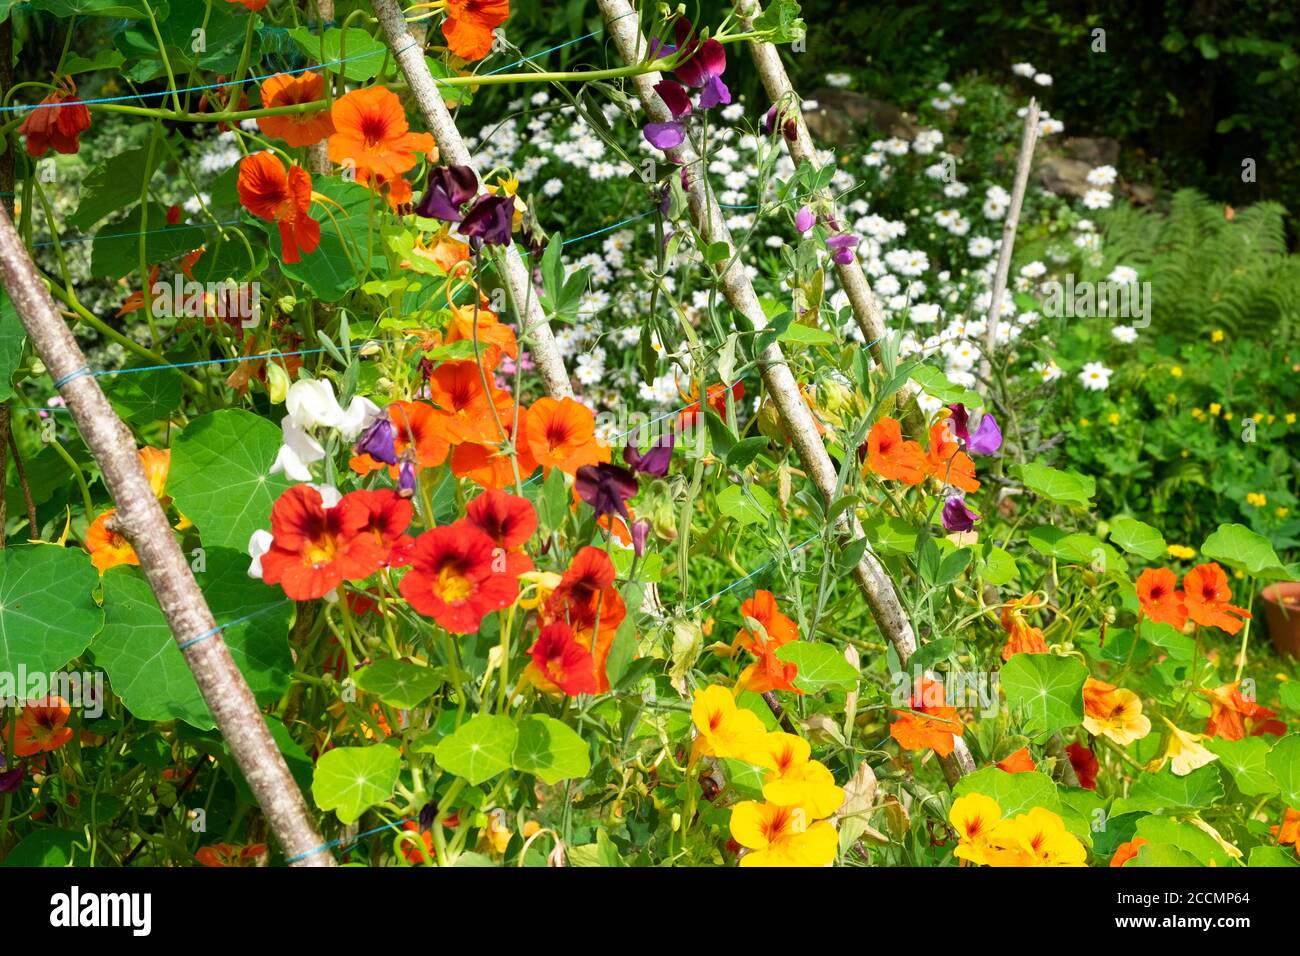 Climbing nasturtiums on a wooden support made of sticks branches wood  in a small backyard garden in August Carmarthenshire Wales UK  KATHY DEWITT Stock Photo